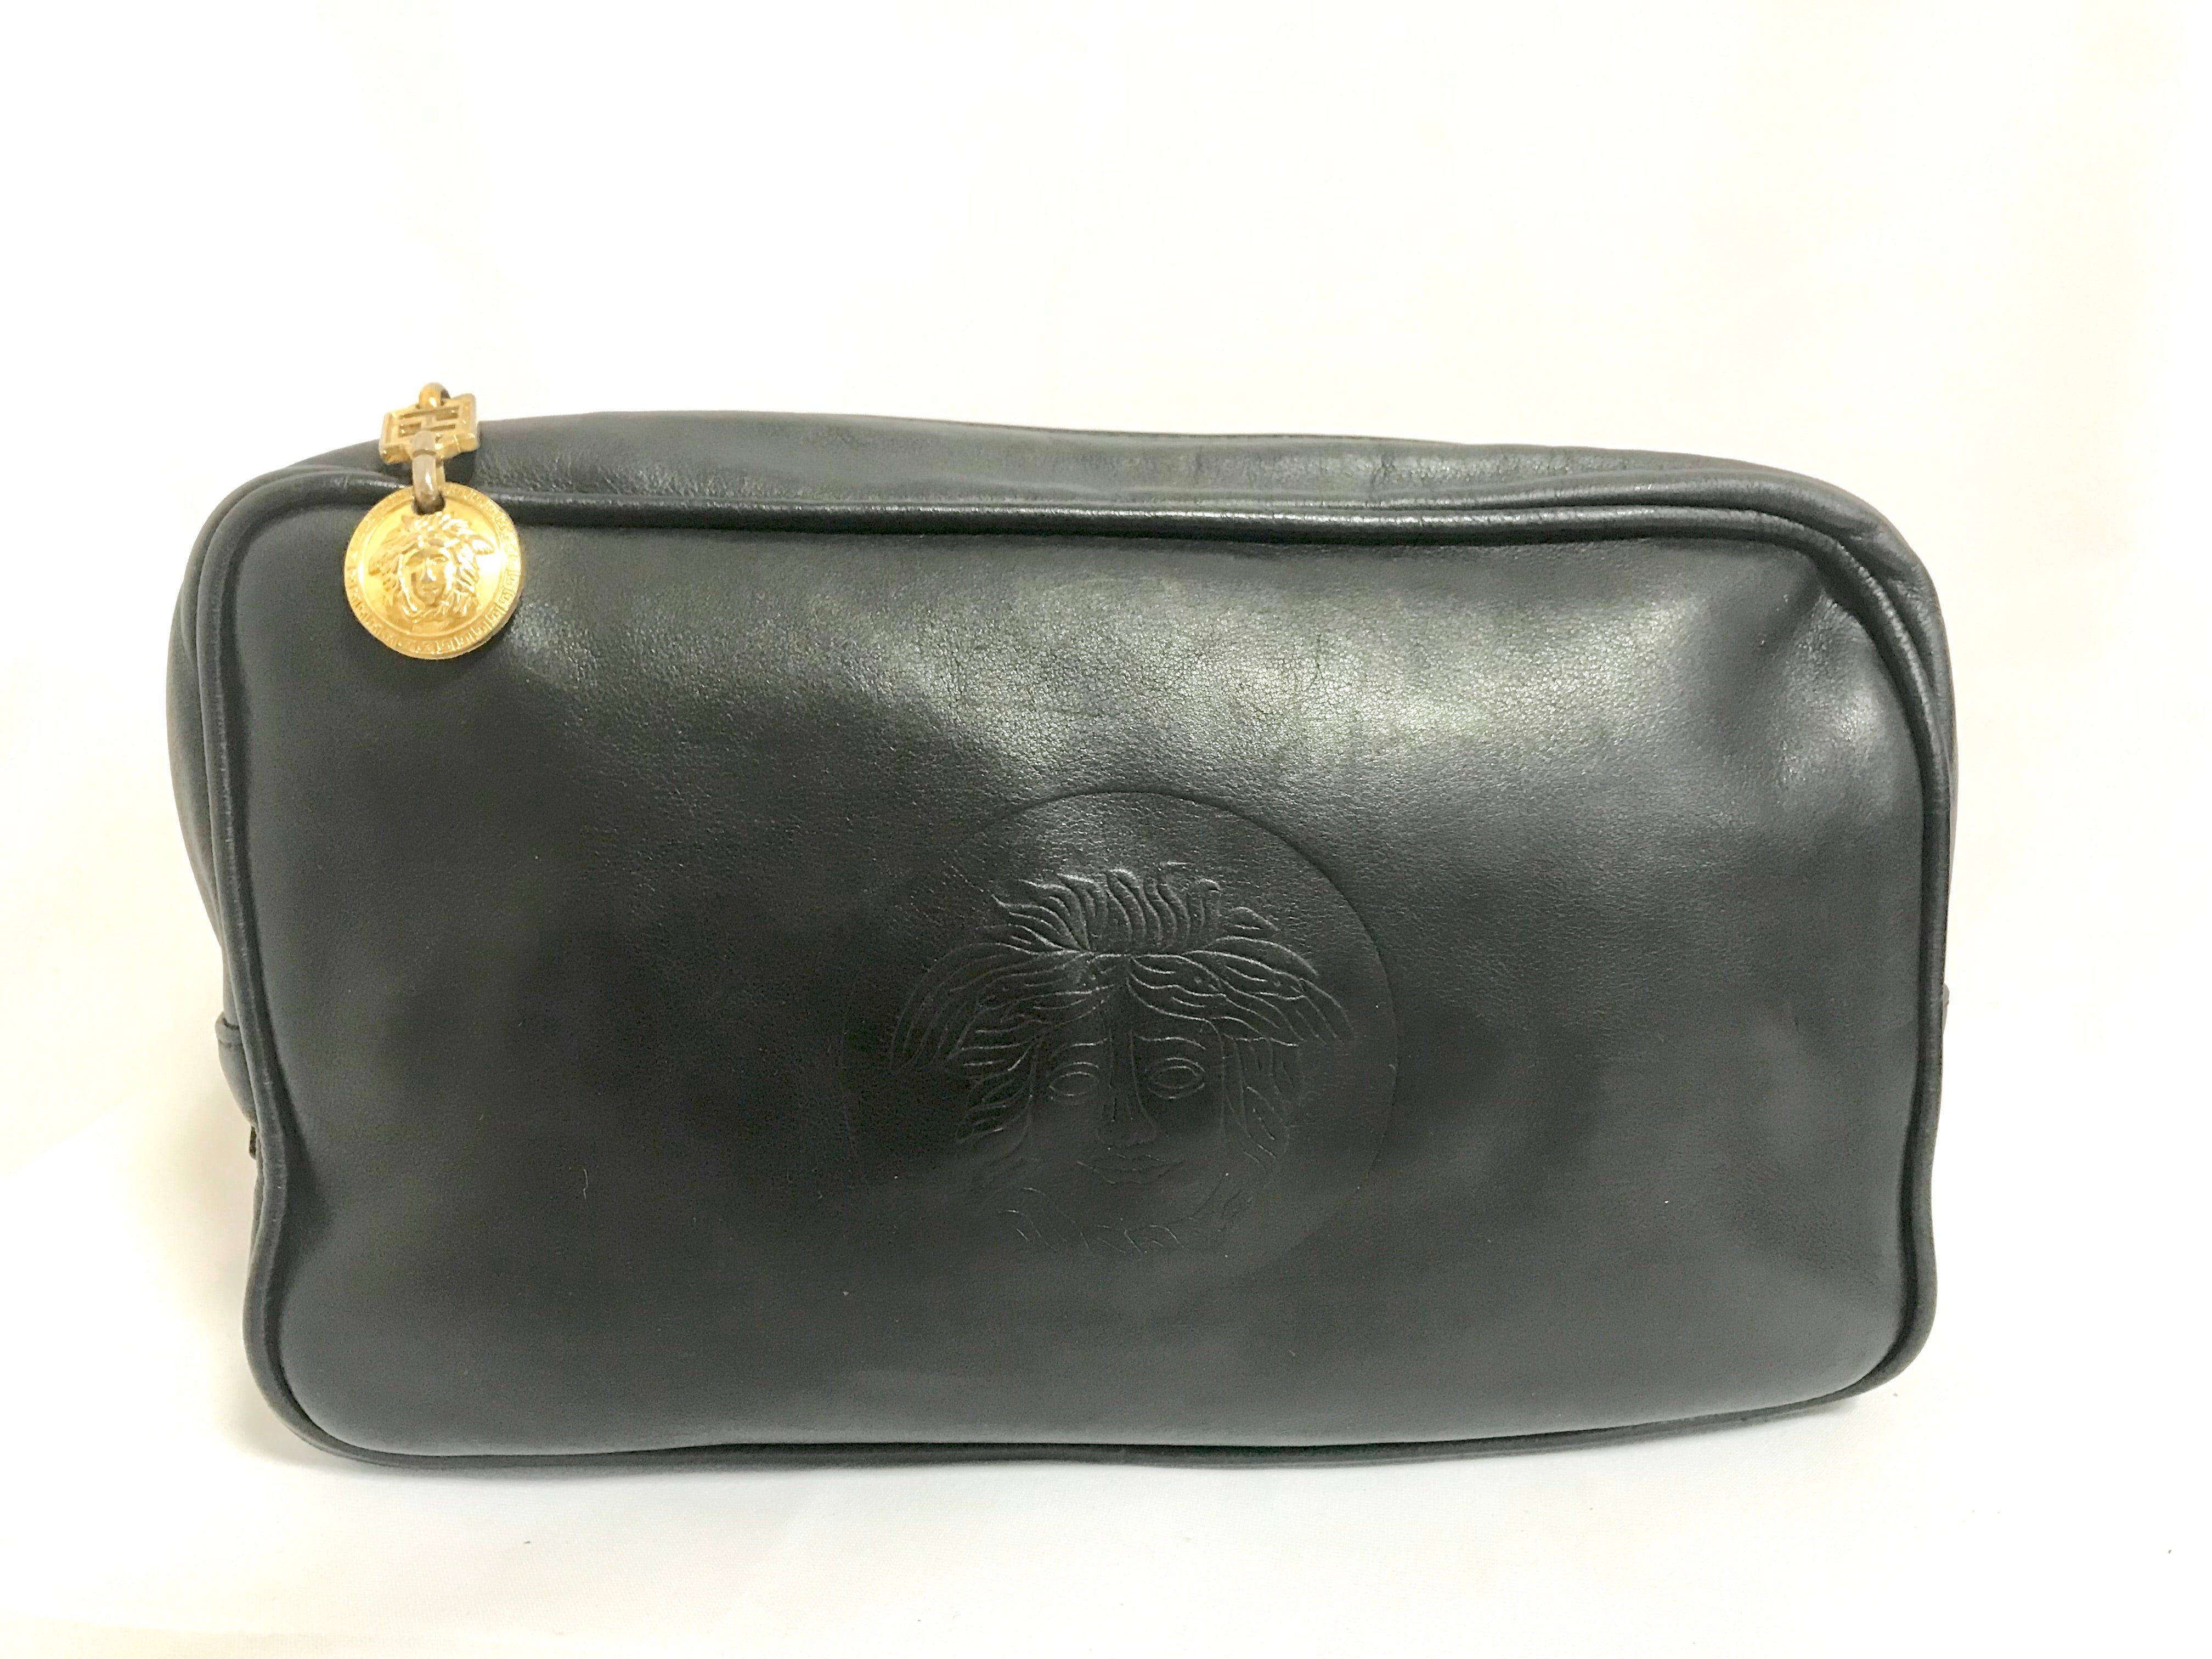 Ladies Leather Purse Manufacturer, Supplier, Exporter - Latest Price